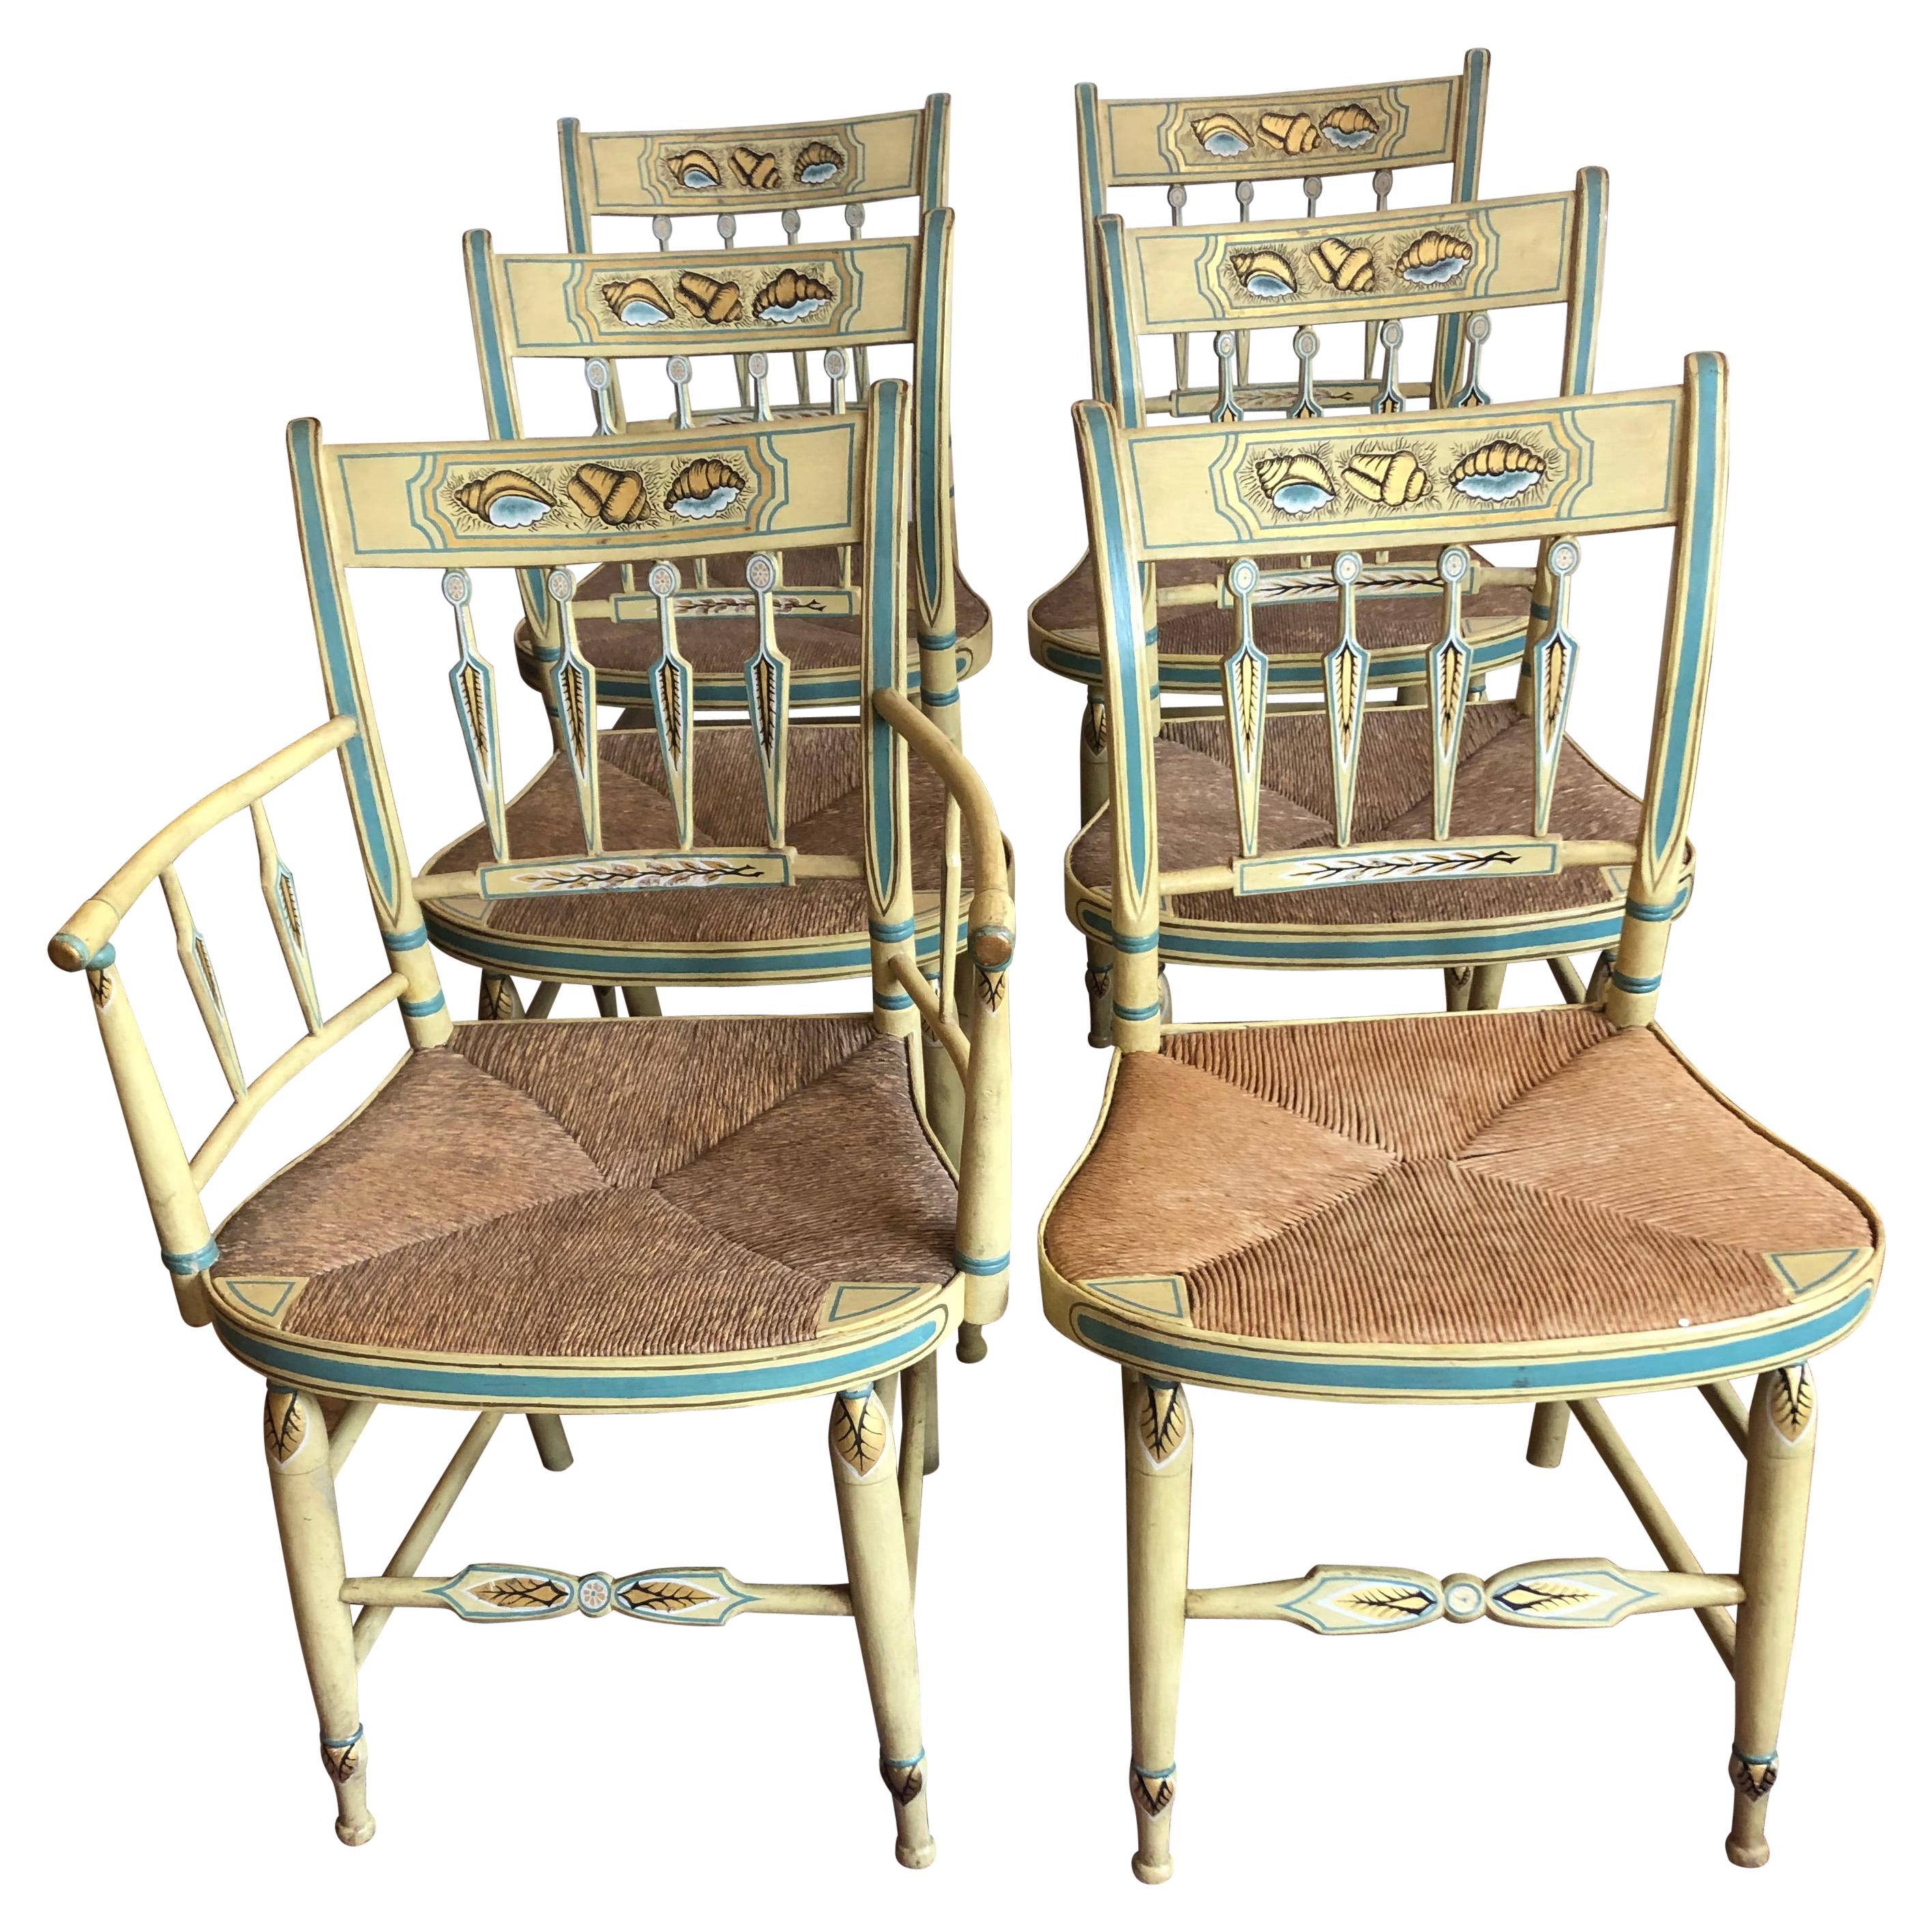 Incredibly Charming Set of 6 Hand Painted Shell Motife Hitchcock Dining Chairs